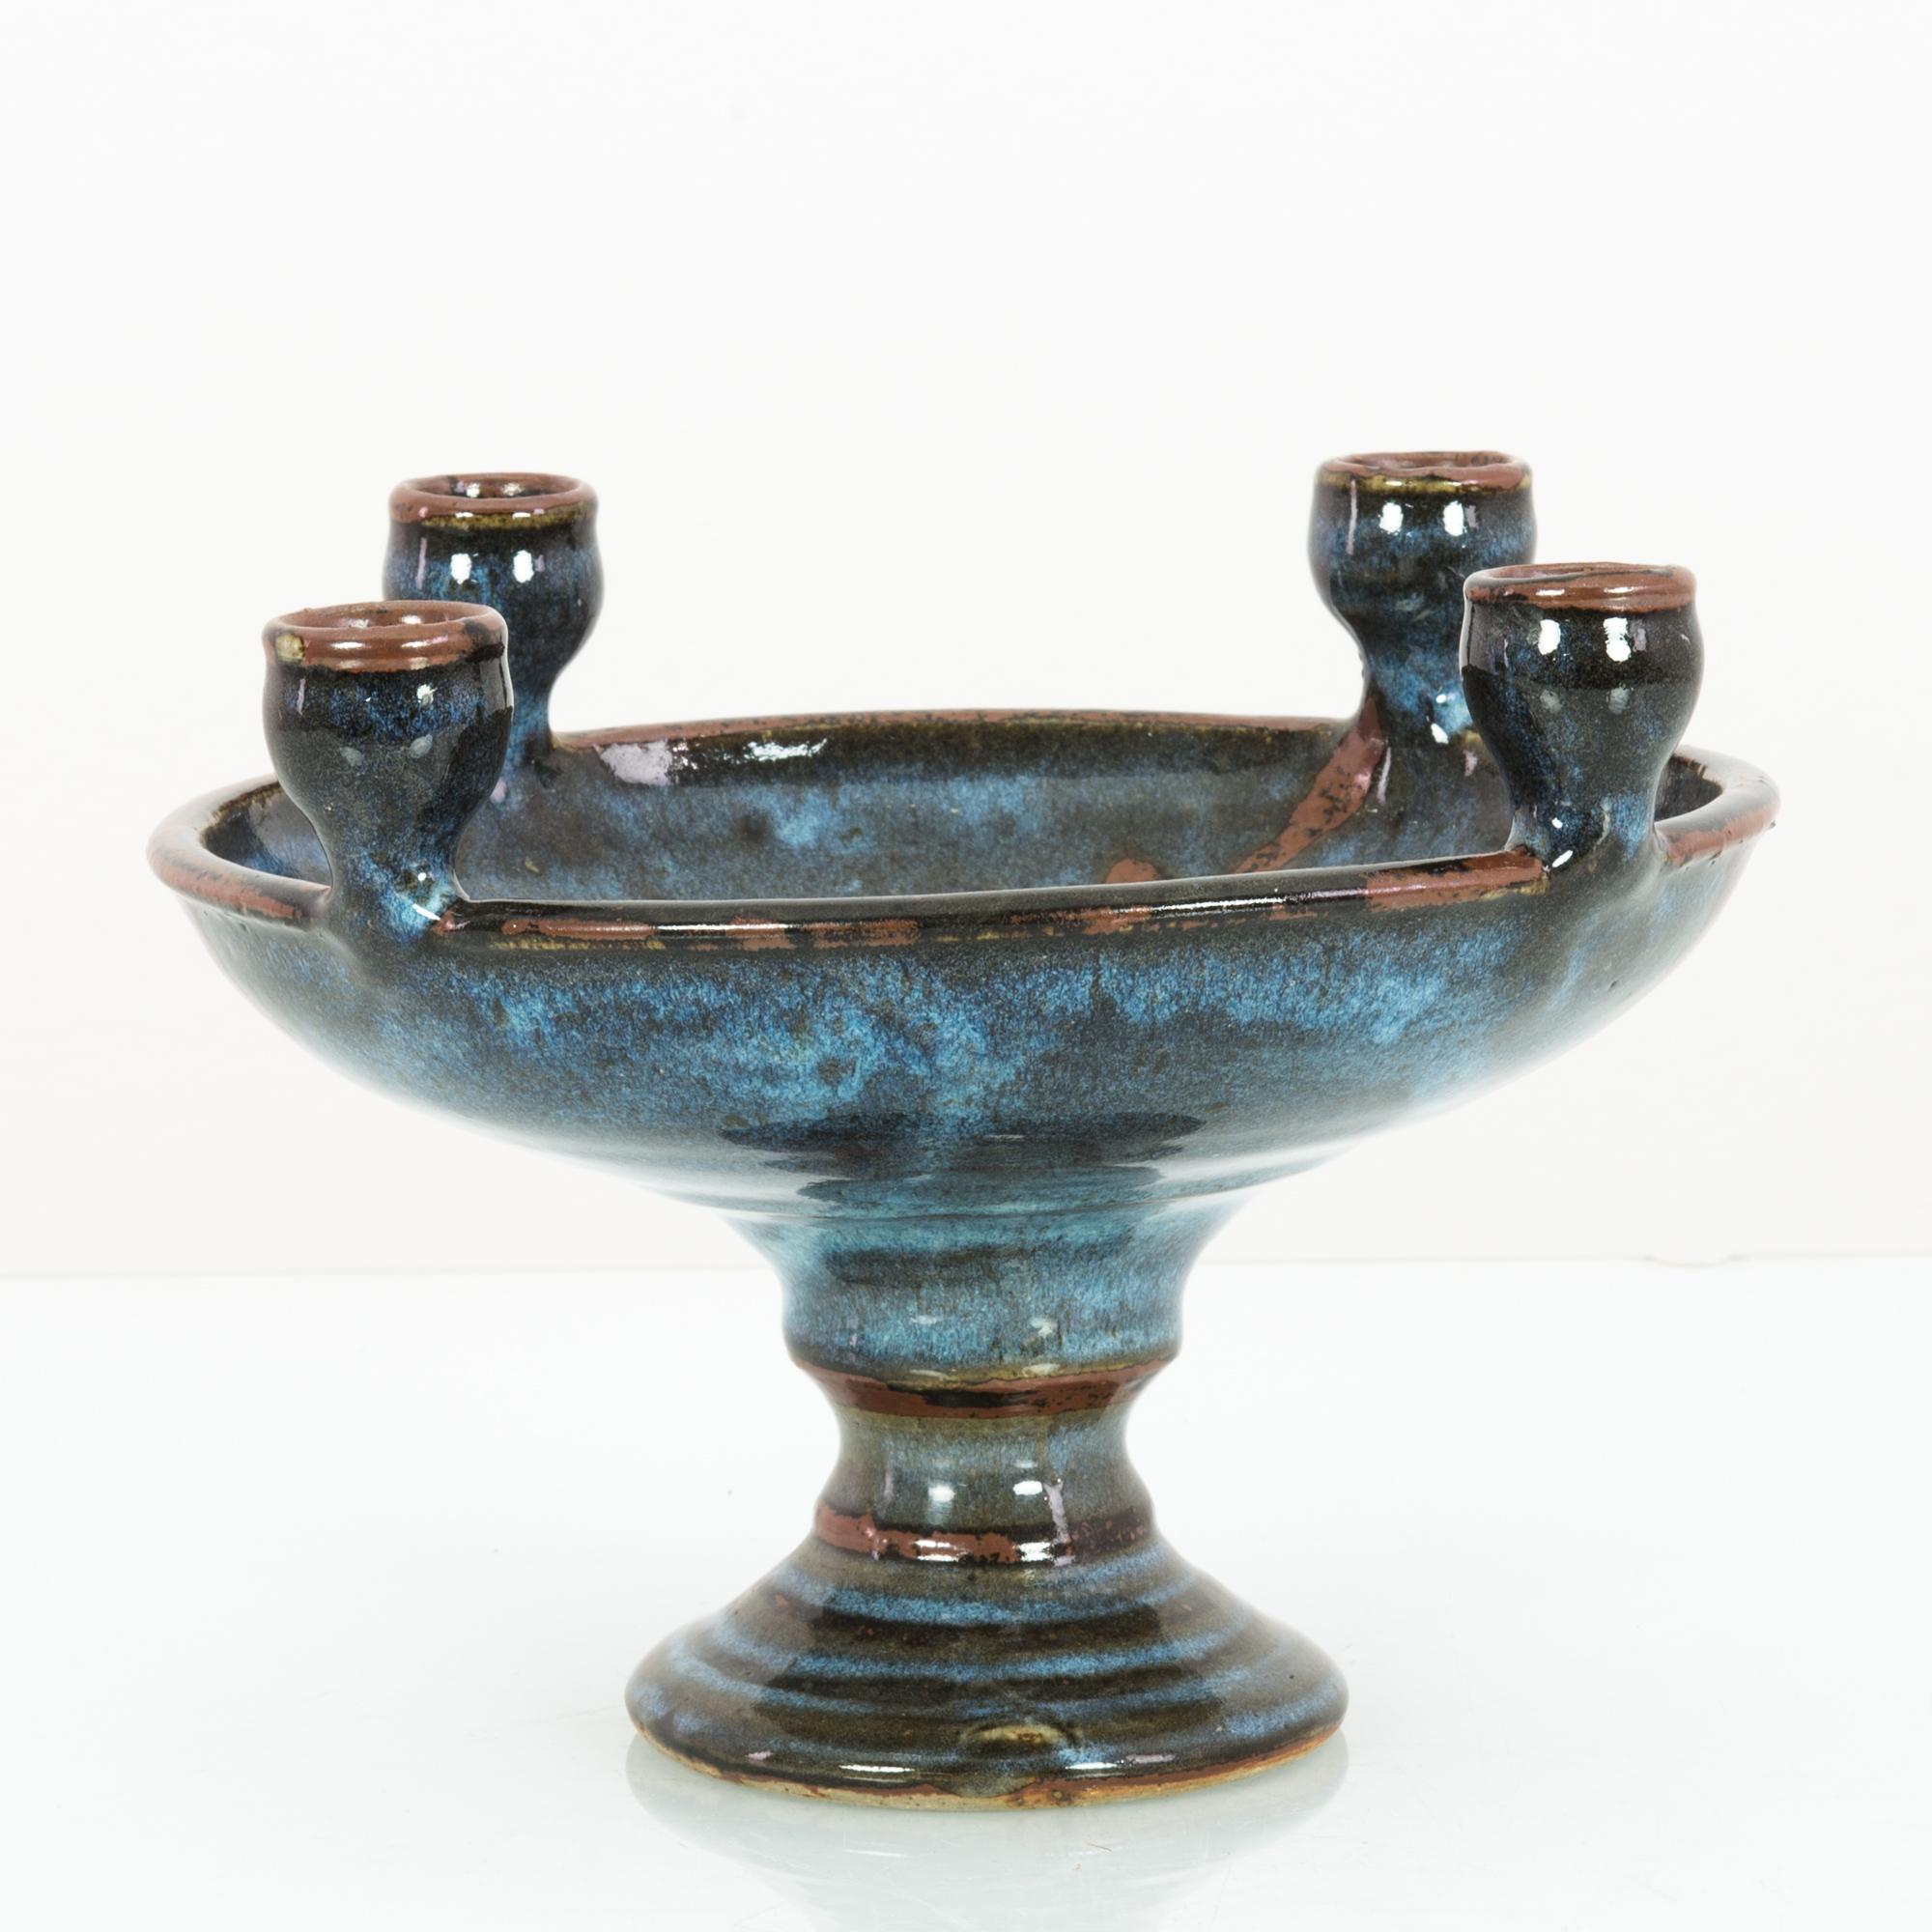 A ceramic candlestick from Czechia, circa 1960. Four candleholders sit upon the rim of a broad dish, glazed in black and indigo, giving the ceramic the aspect of a moonlit sky. The rim of the candleholders and bowl are bordered in brown ochre,